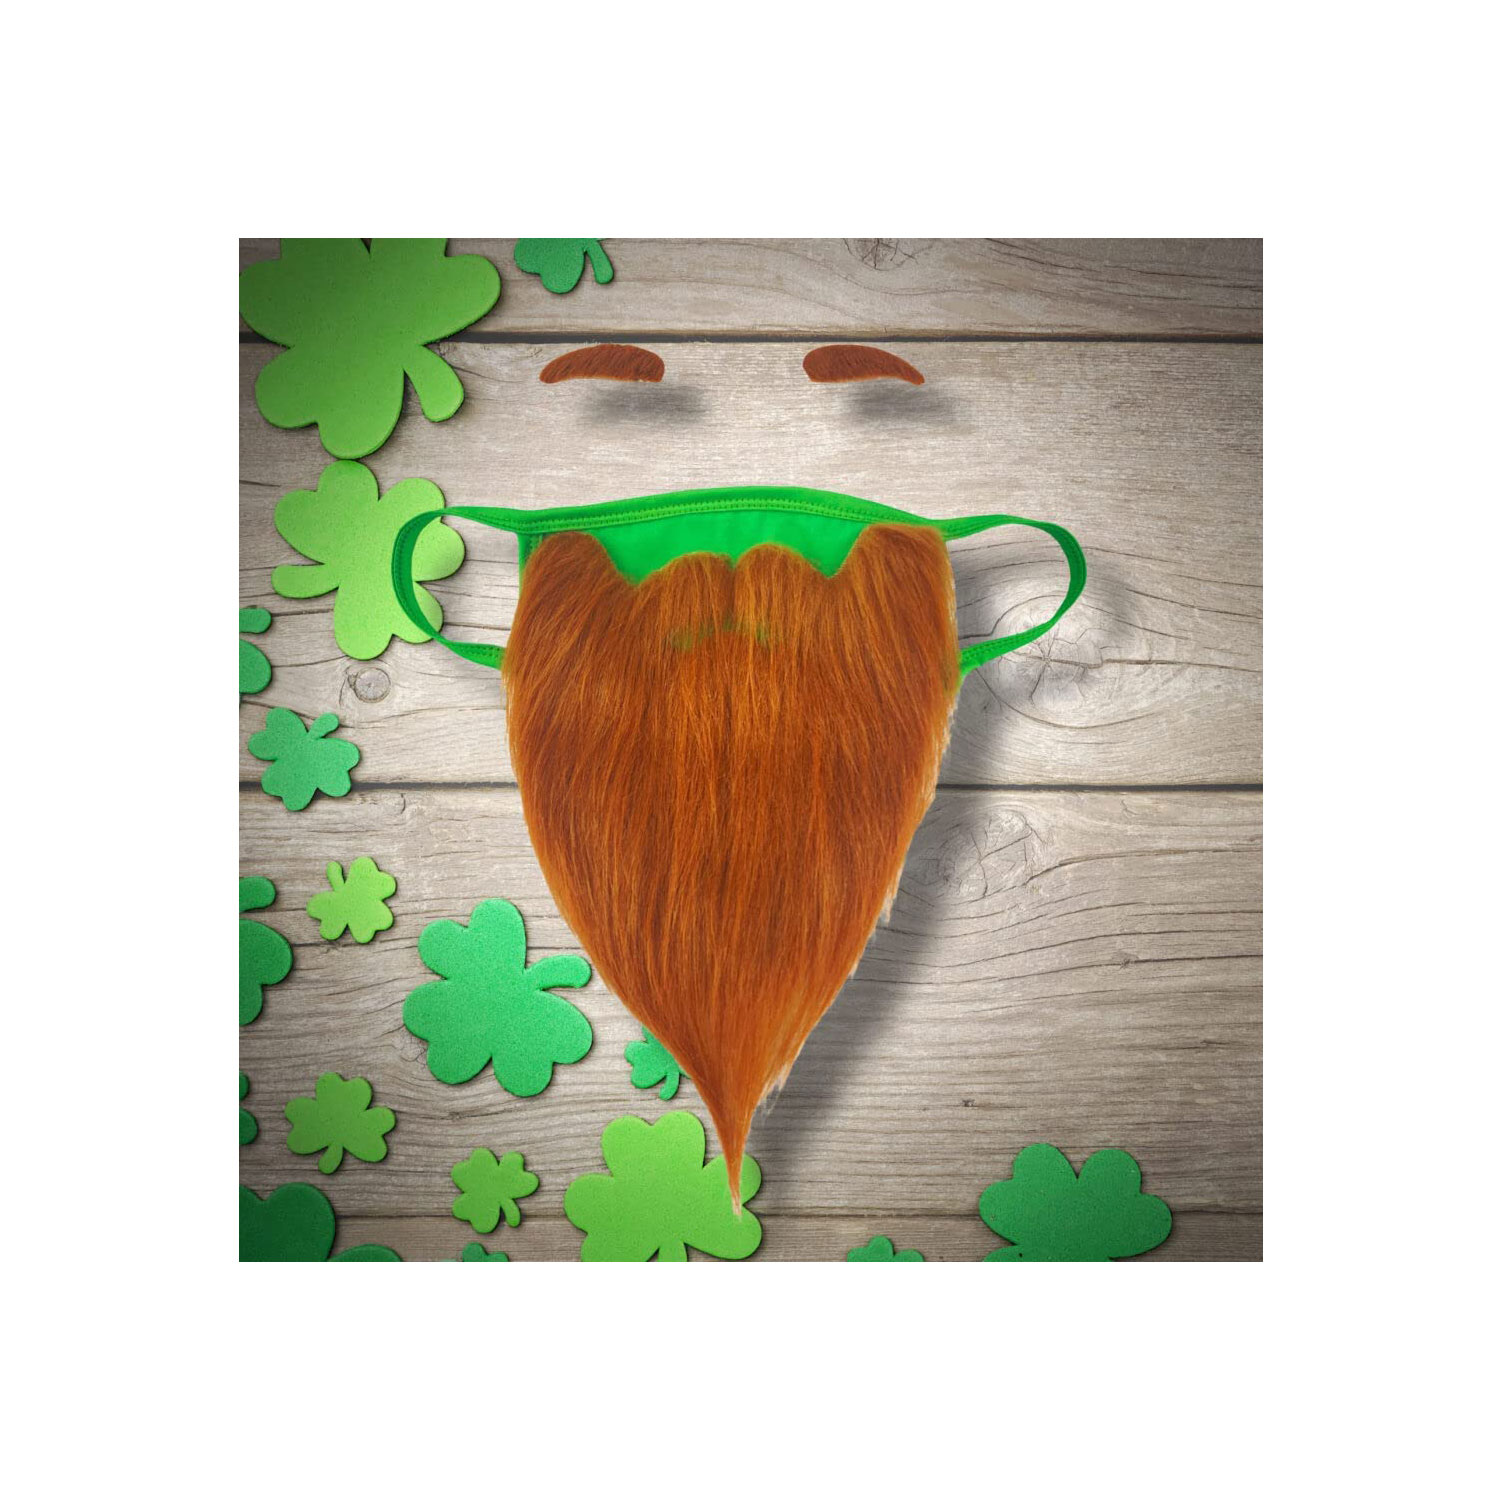 St Patricks Day Beard Face Mask and Green Hat Leprechaun Costume for Adults